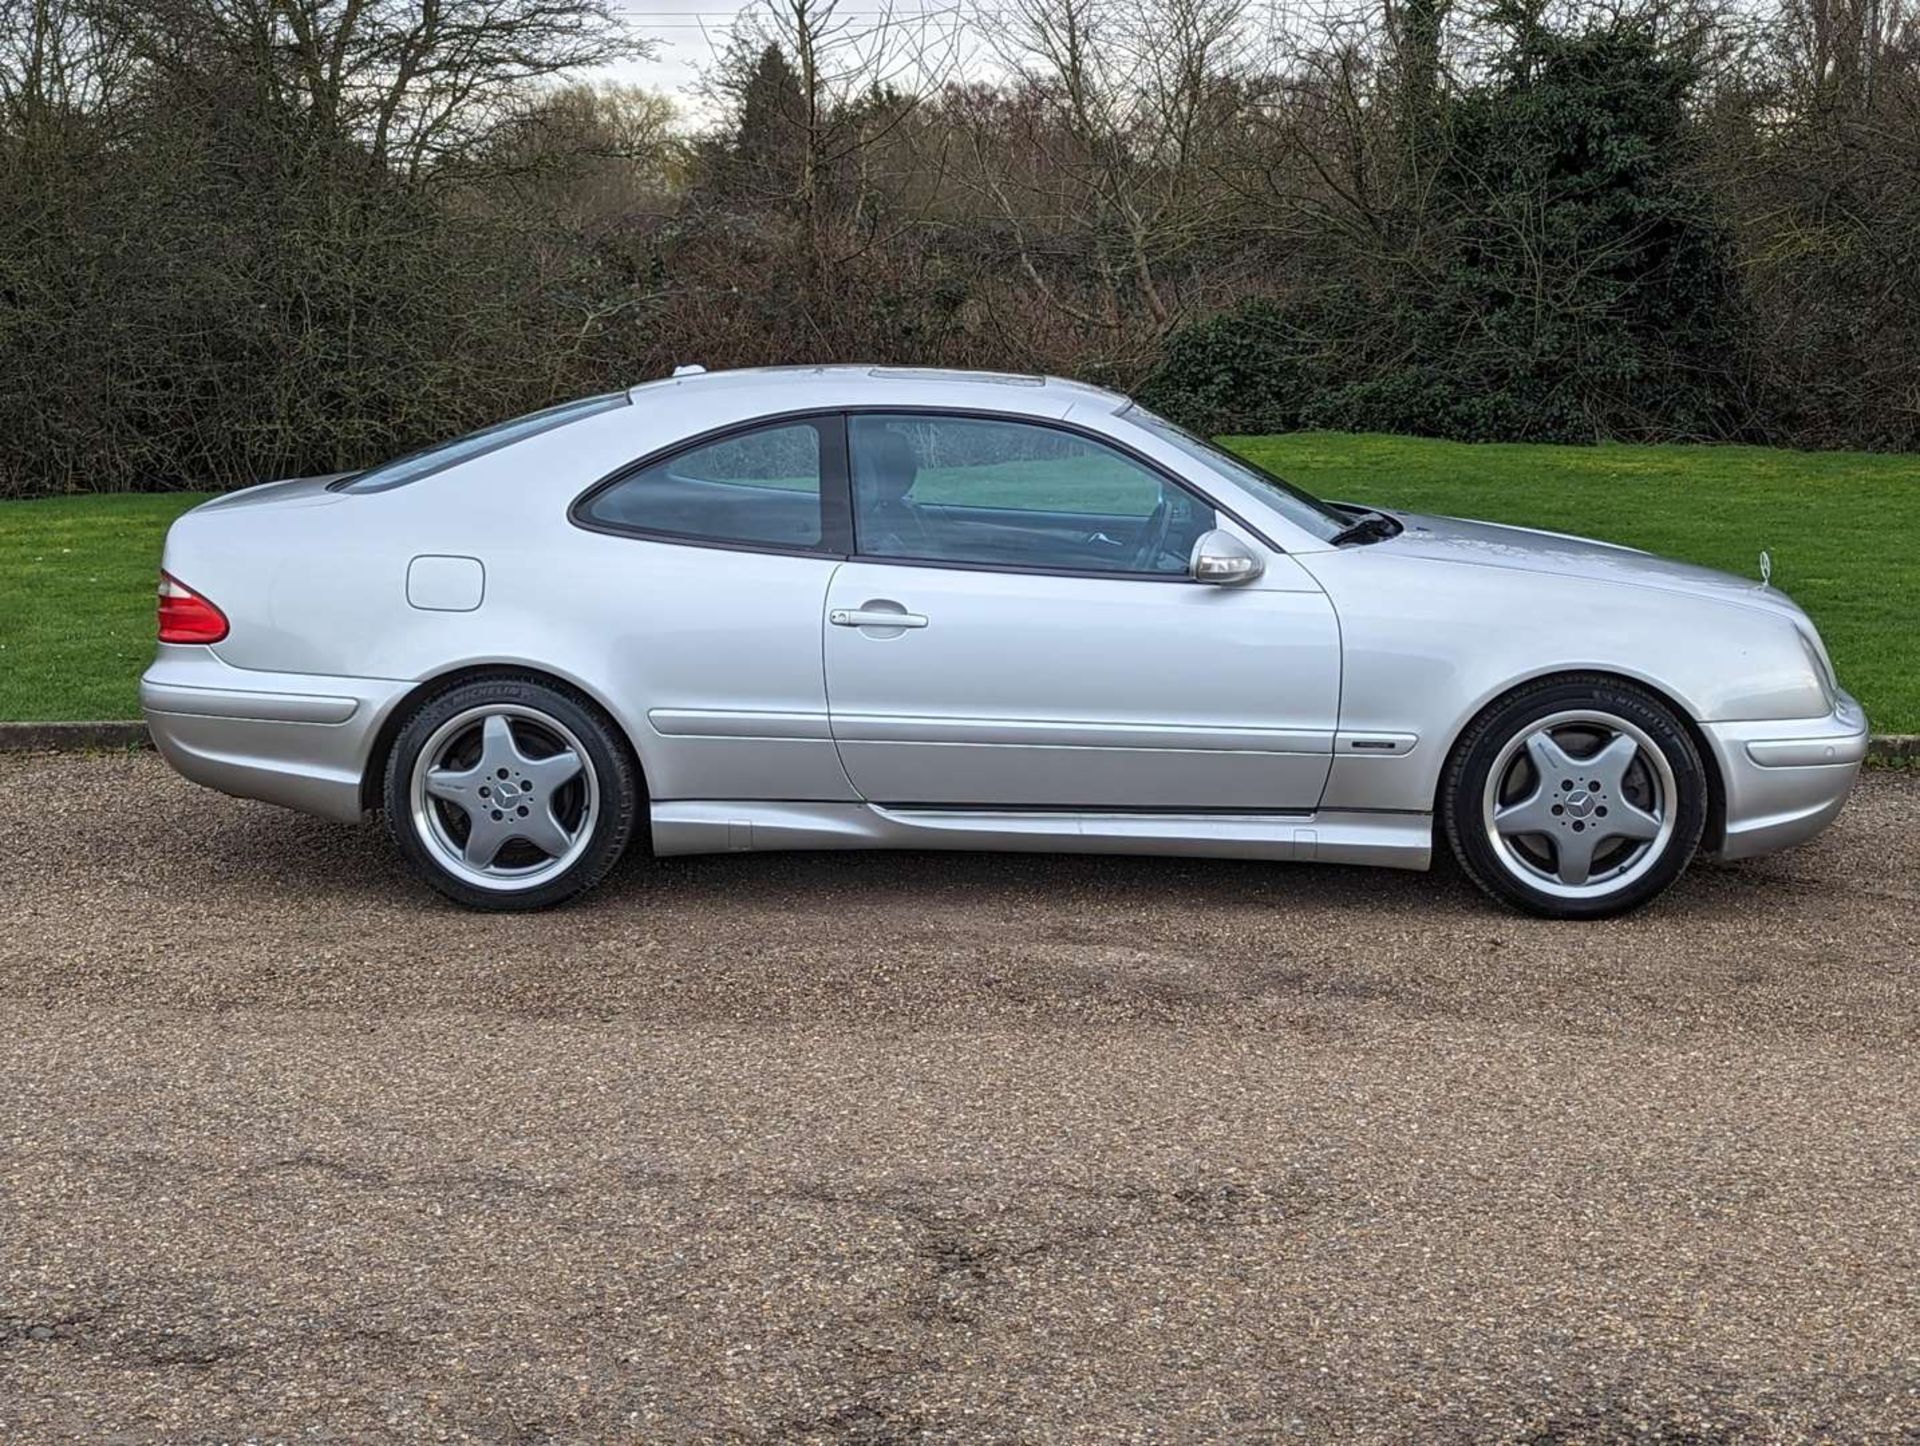 2002 MERCEDES CLK55 AMG COUPE - Image 8 of 28